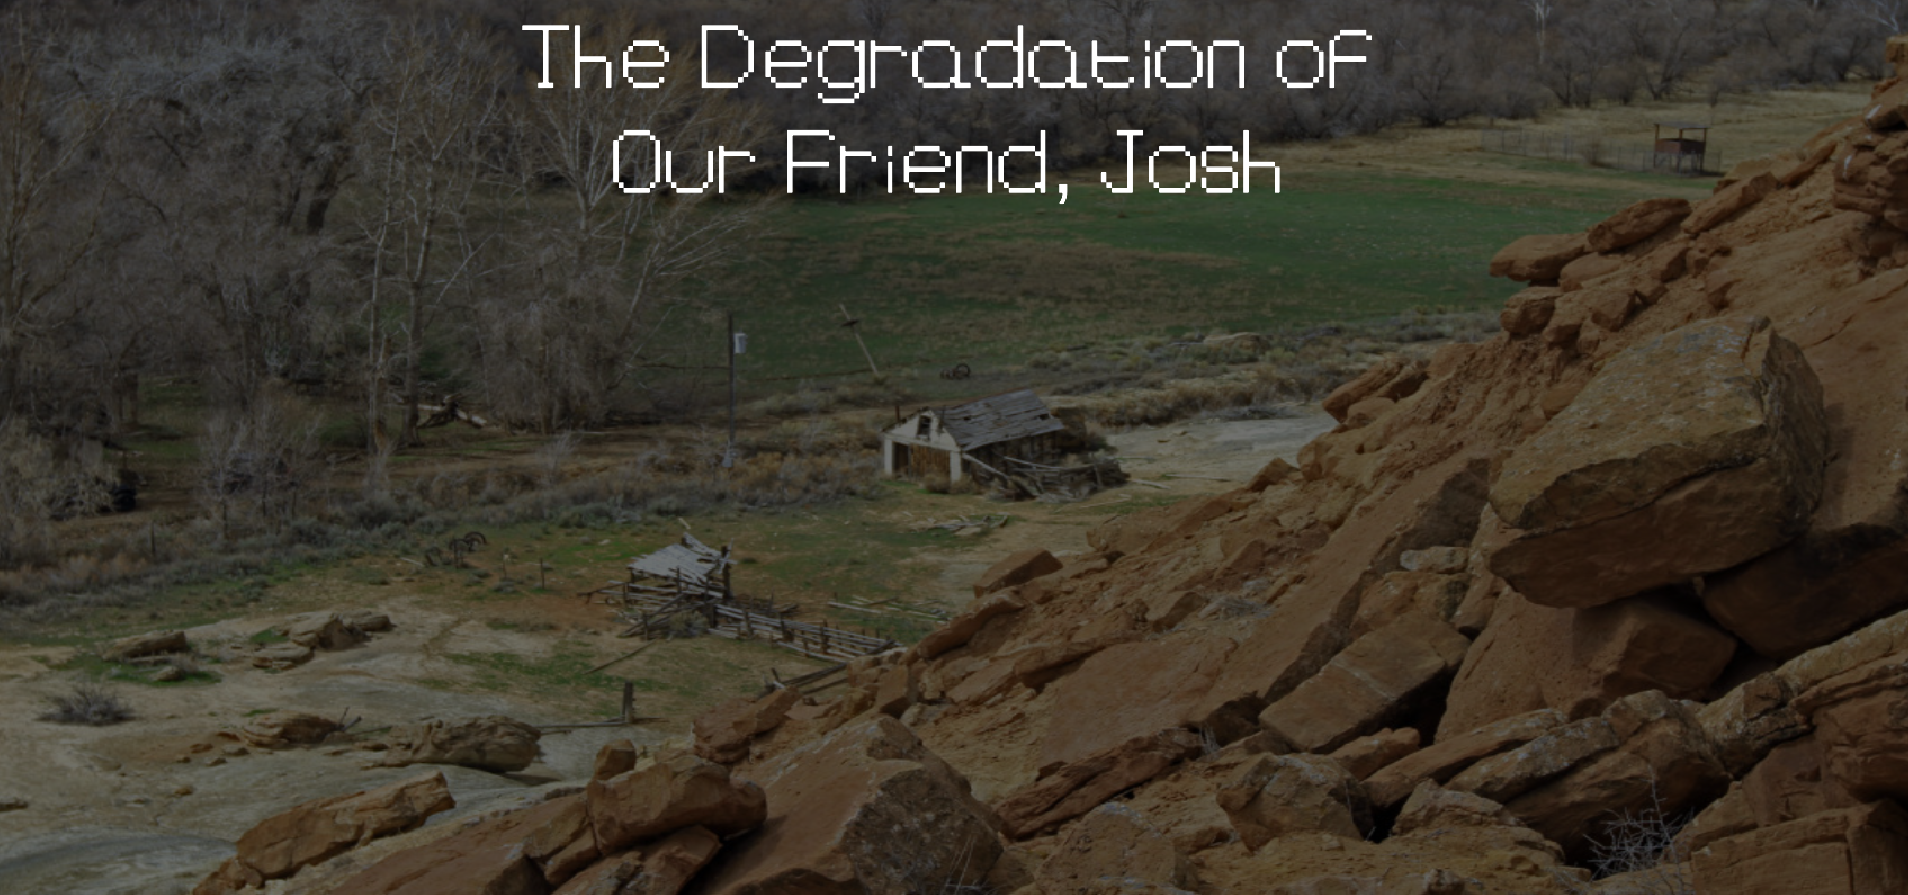 The Degradation of Our Friend, Josh